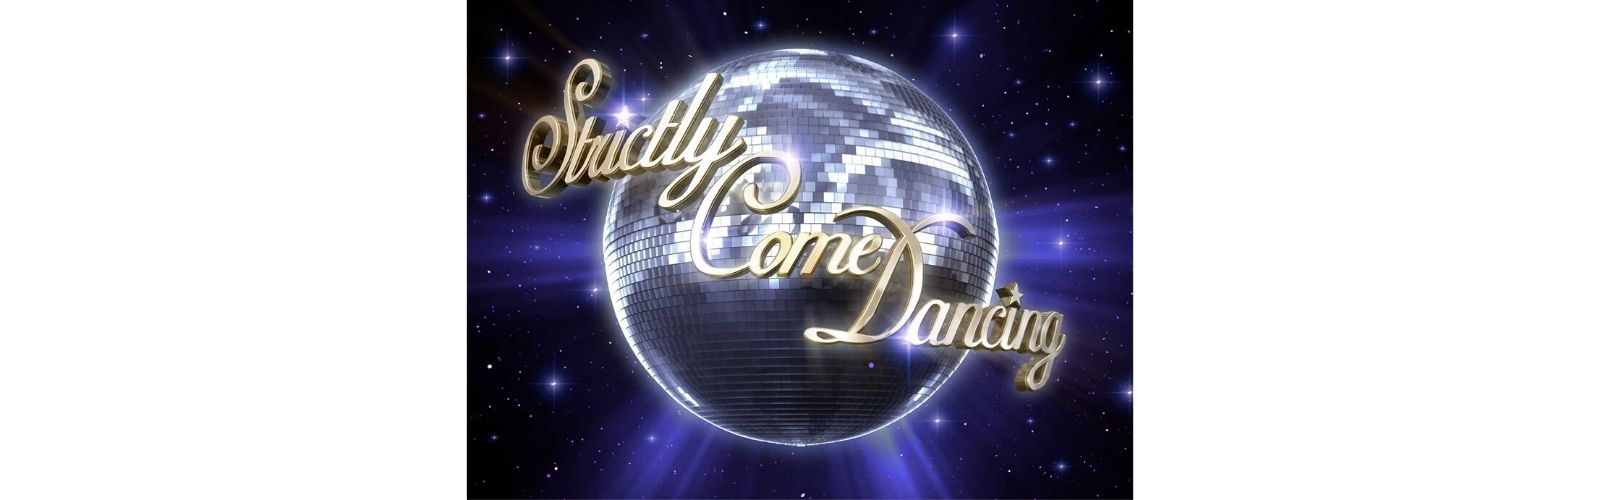 Strictly Come Dancing (Banbridge) – 6th January 2020